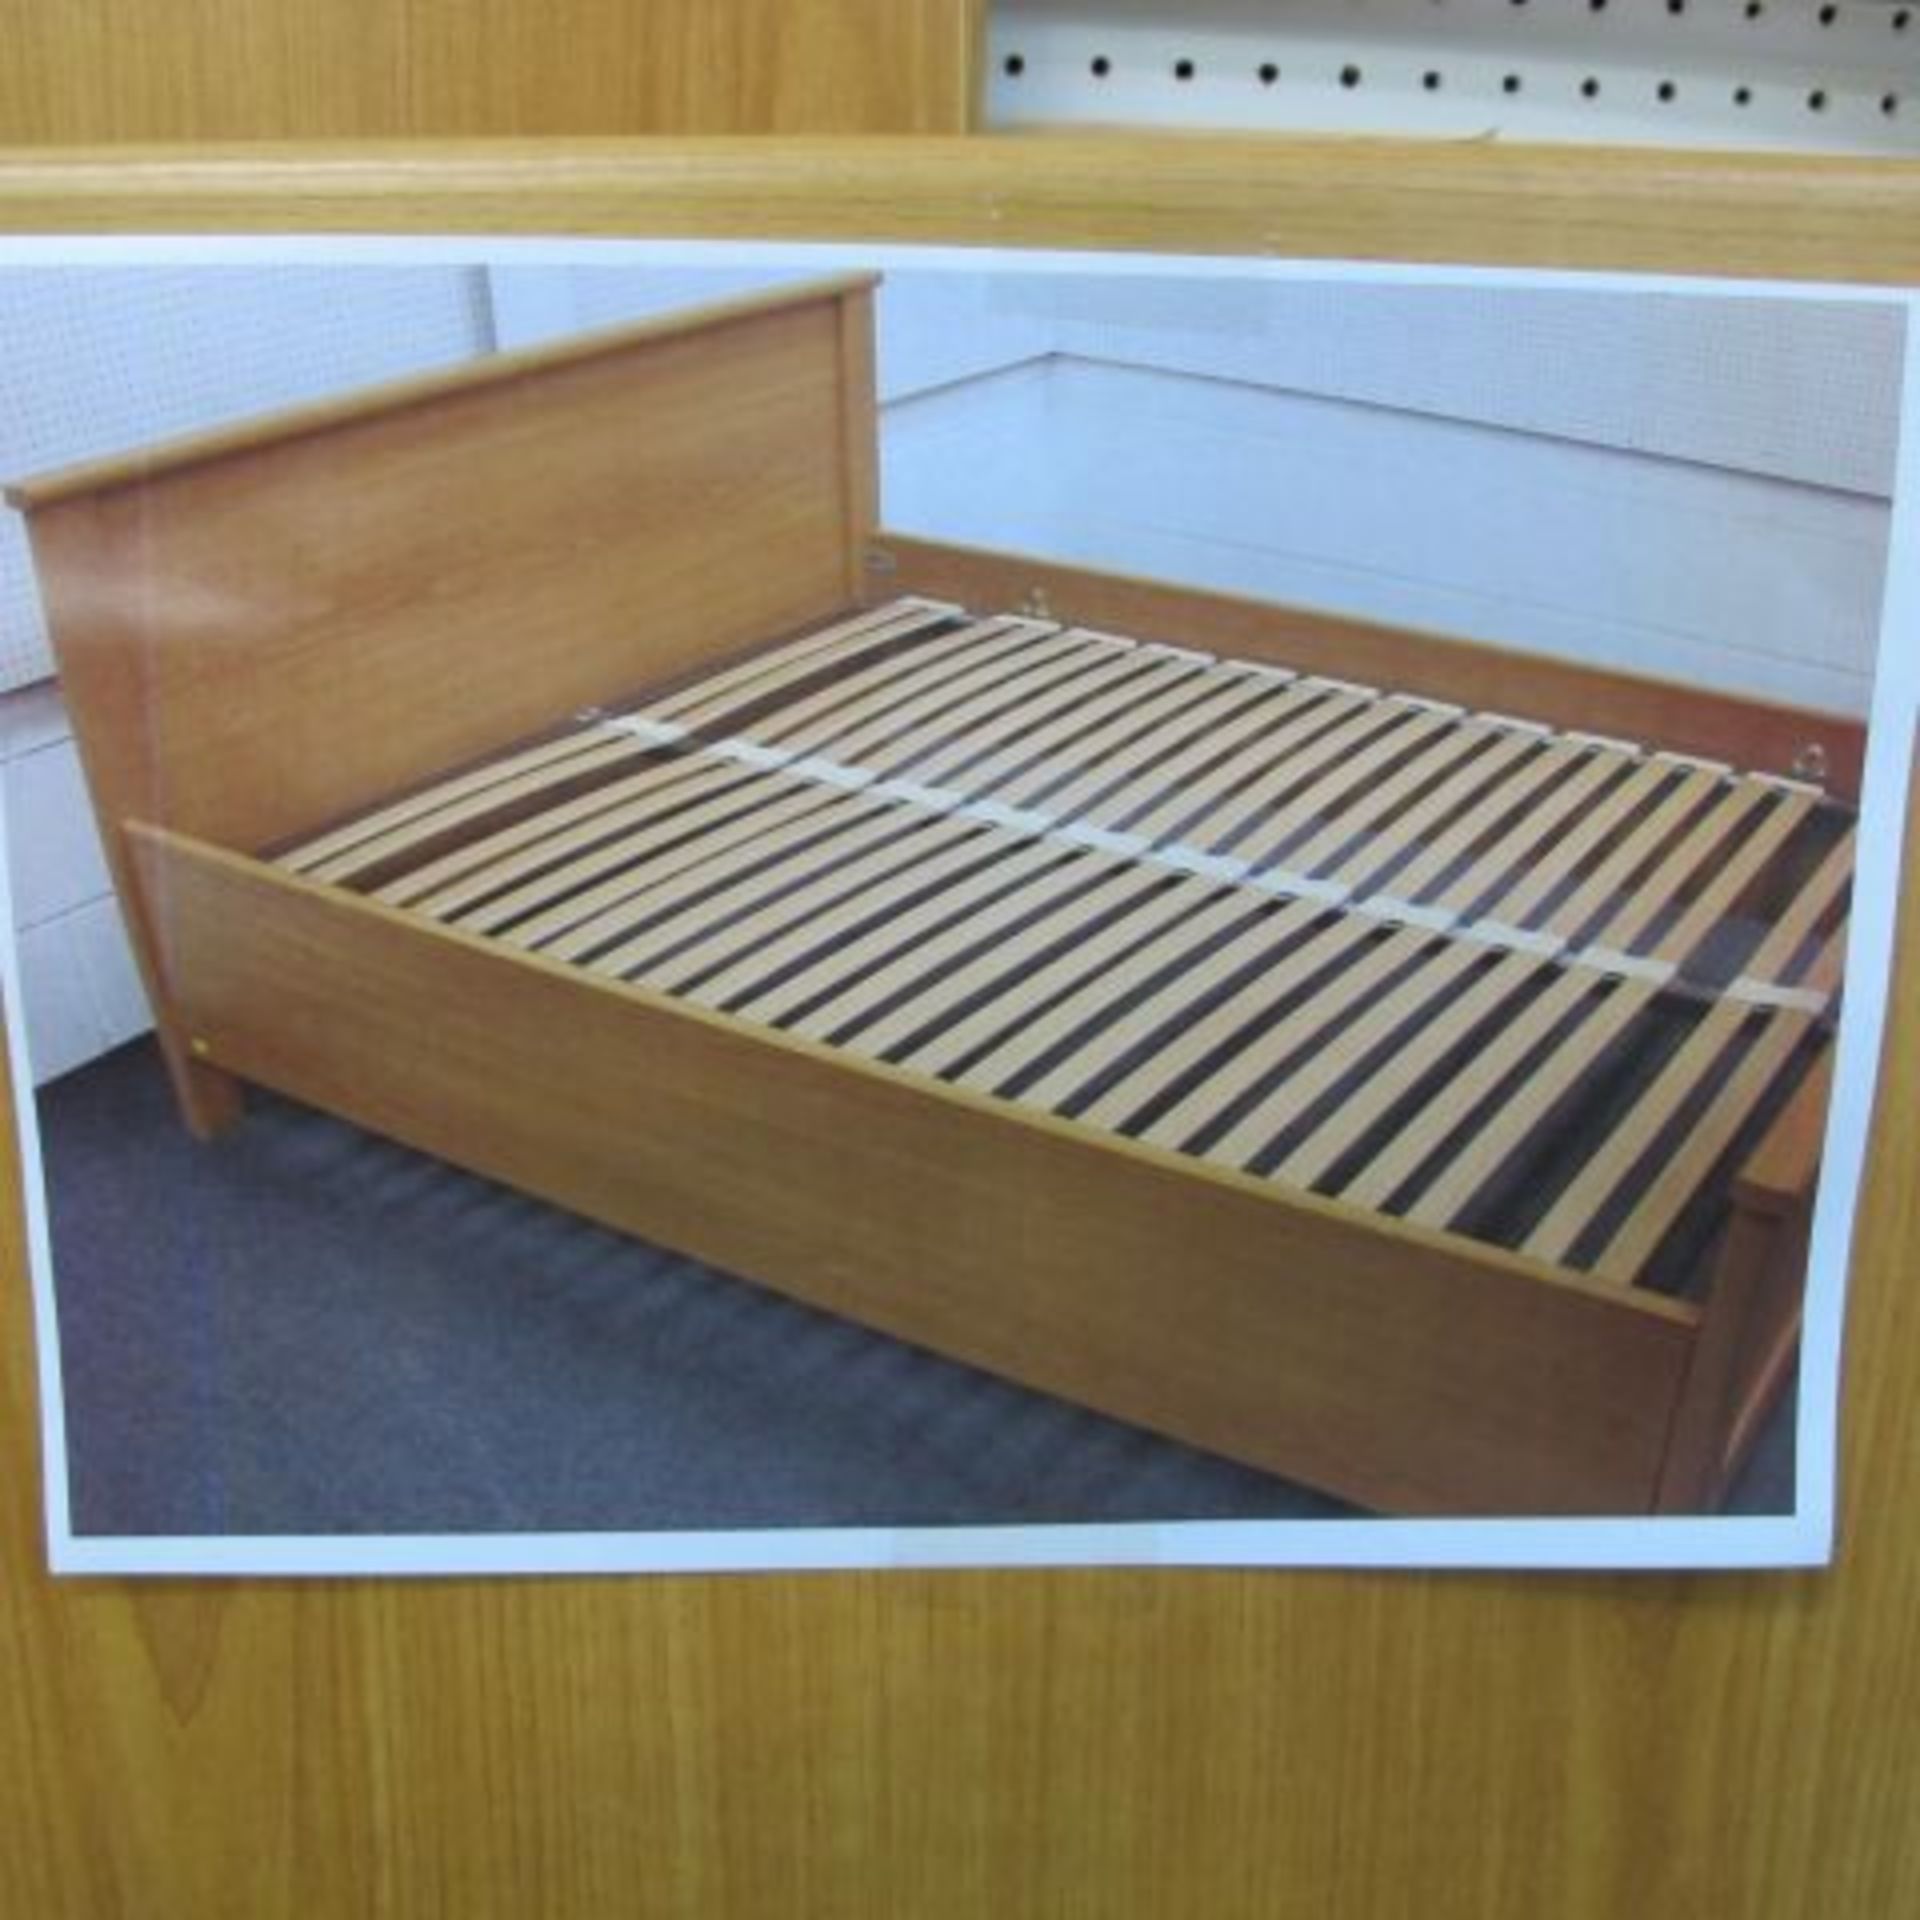 A Modern Light Oak Double Bed Frame with Plain Panel Head/Footboards.  (est. £40-£60) - Image 2 of 2